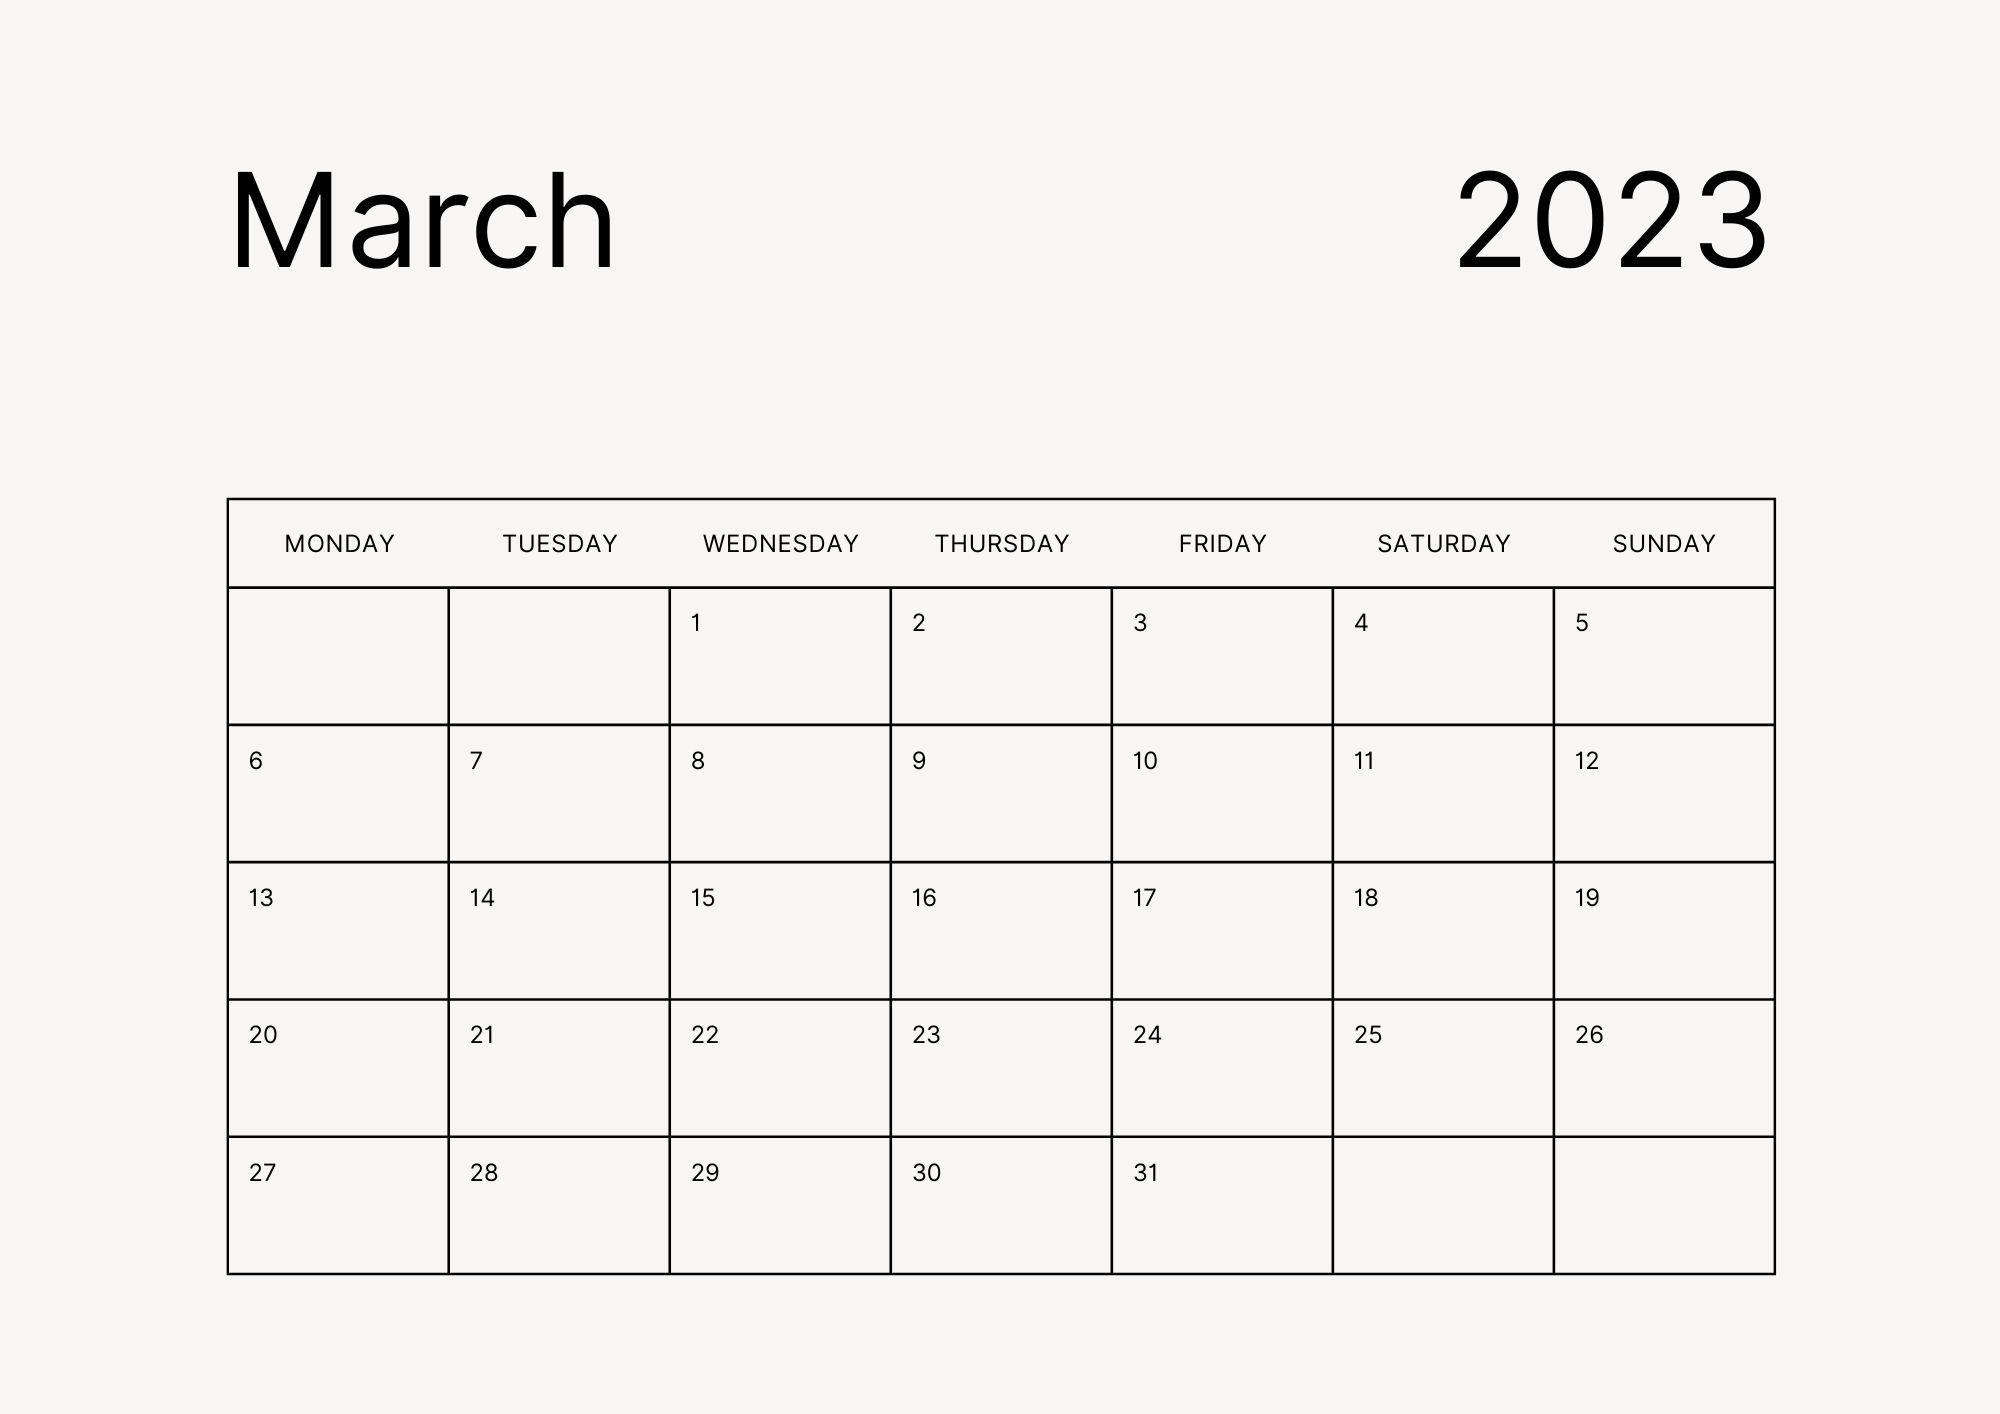 March Holidays 2023